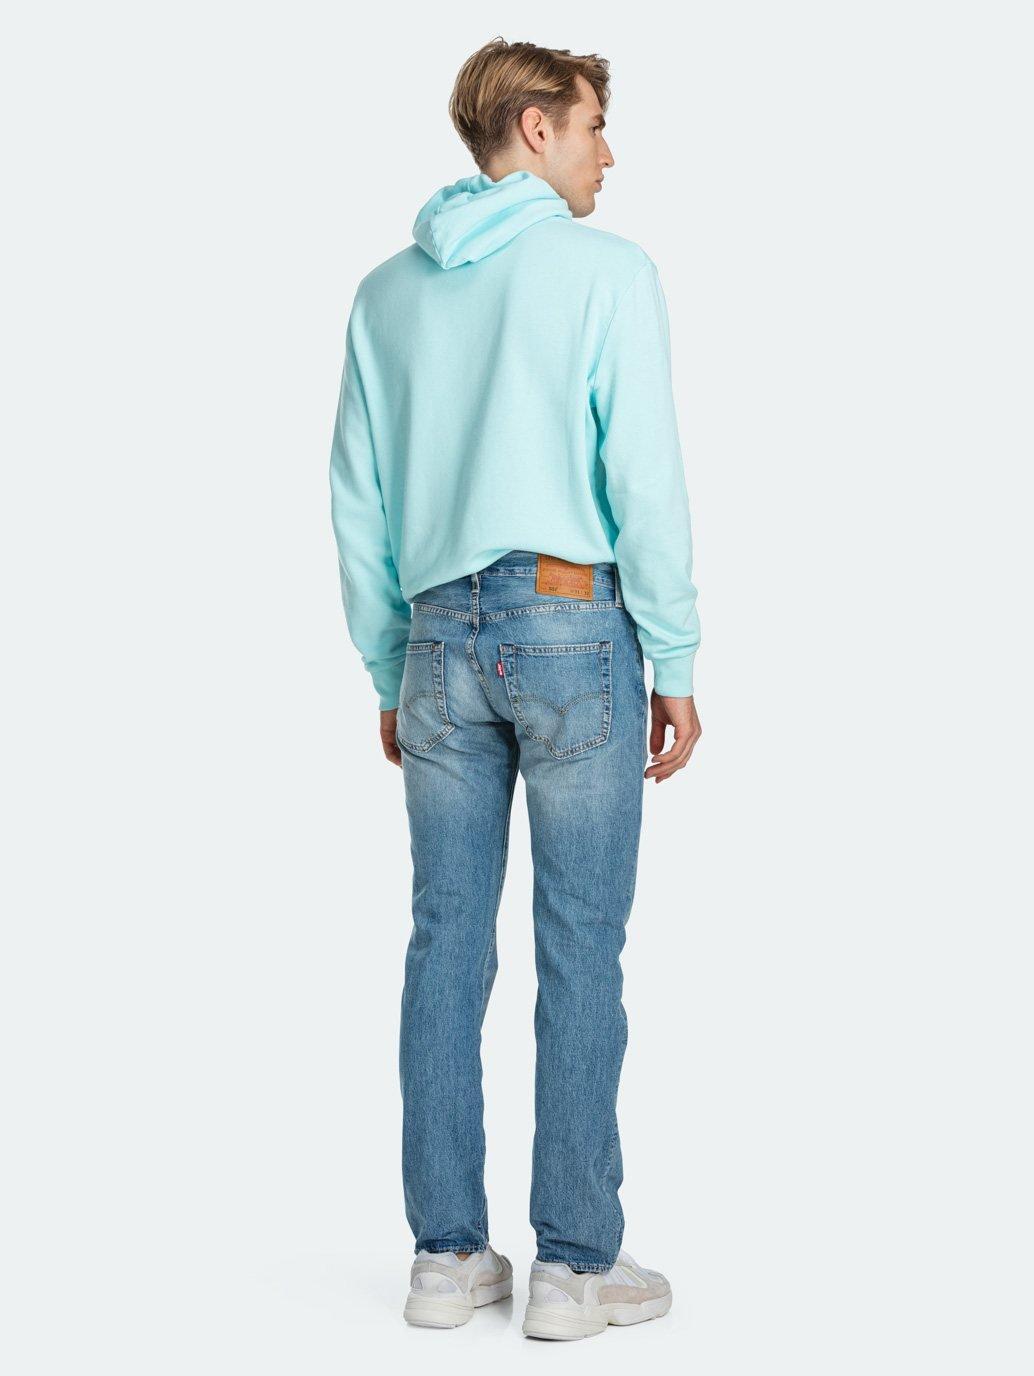 levis malaysia 501 original fit jeans for men menta cool back view